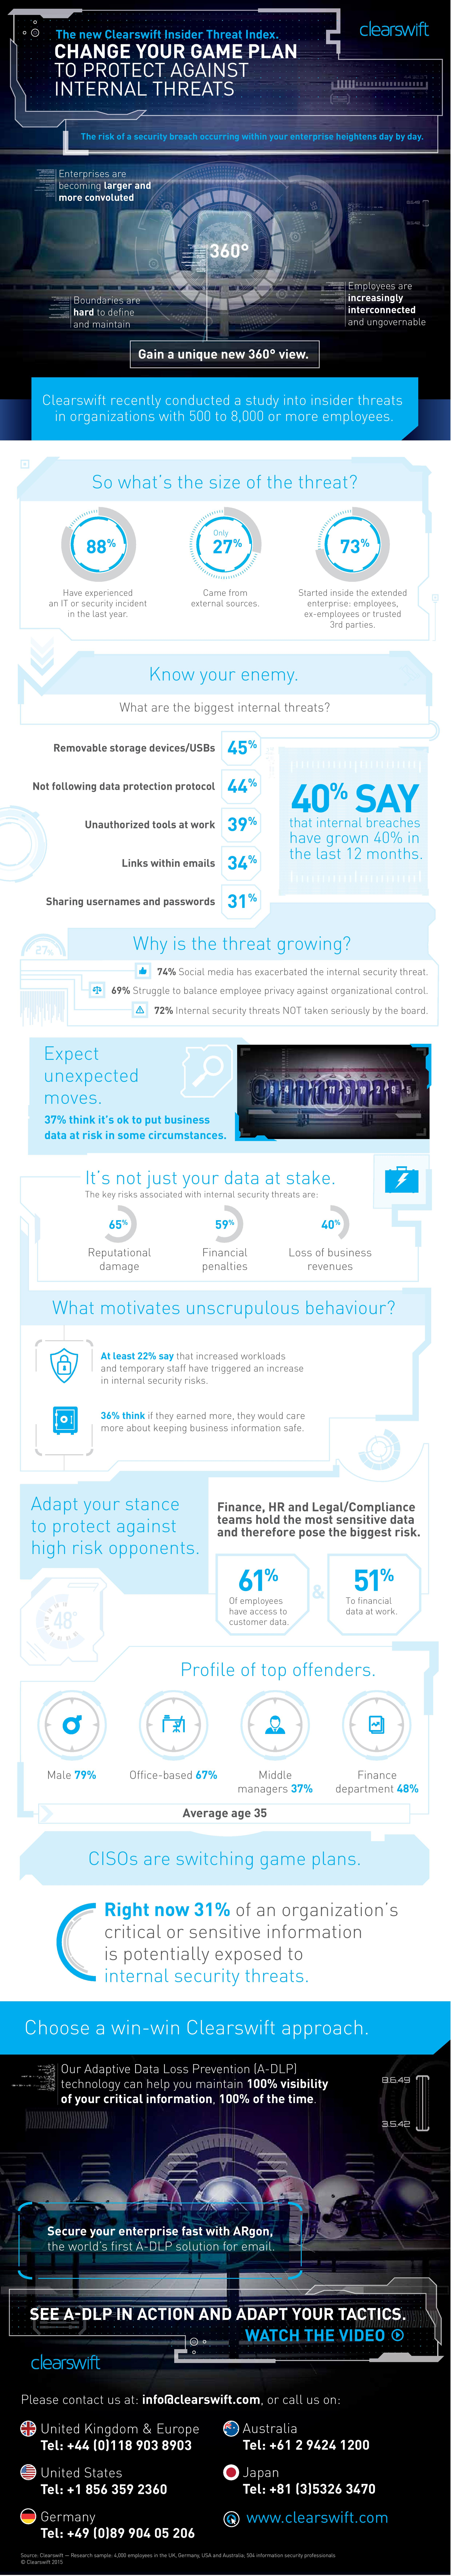 Clearswift_Insider_threat_infographic-page-001